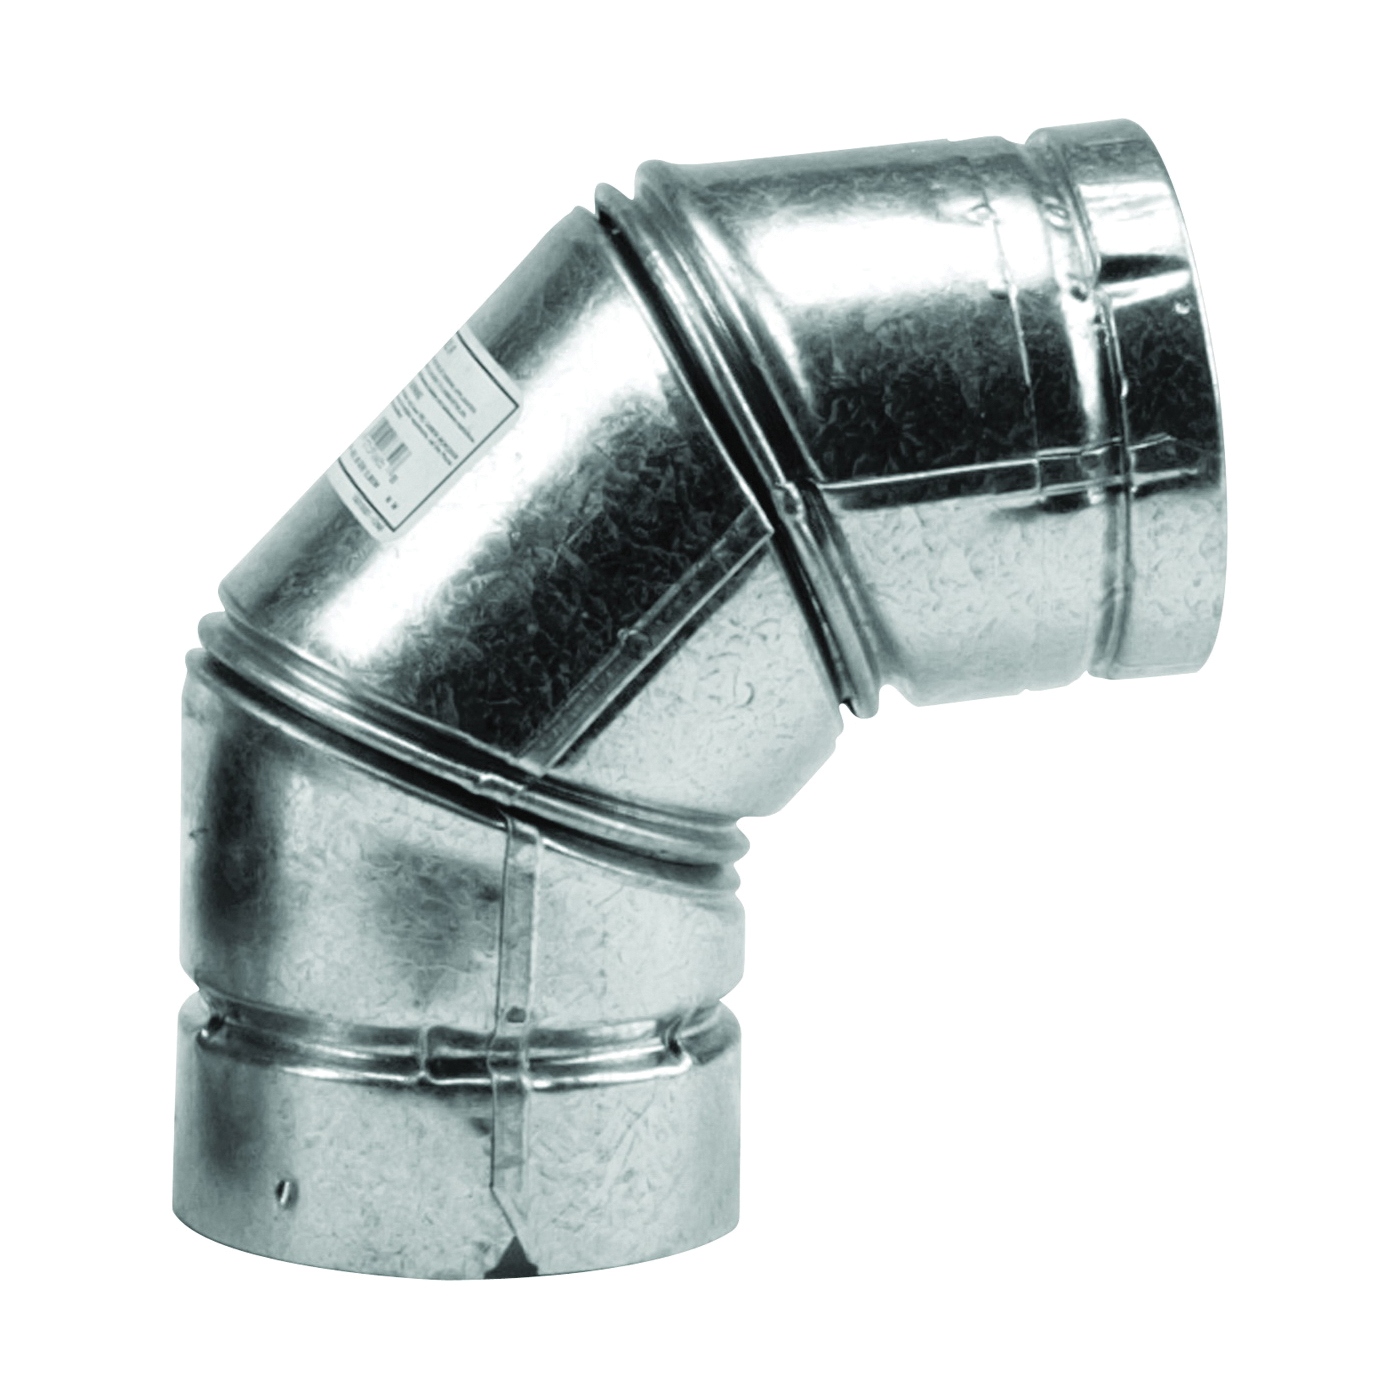 PELLET PIPE 243231/243230 Stove Pipe Elbow, 90 deg Angle, 3 in, Stainless Steel, Galvanized